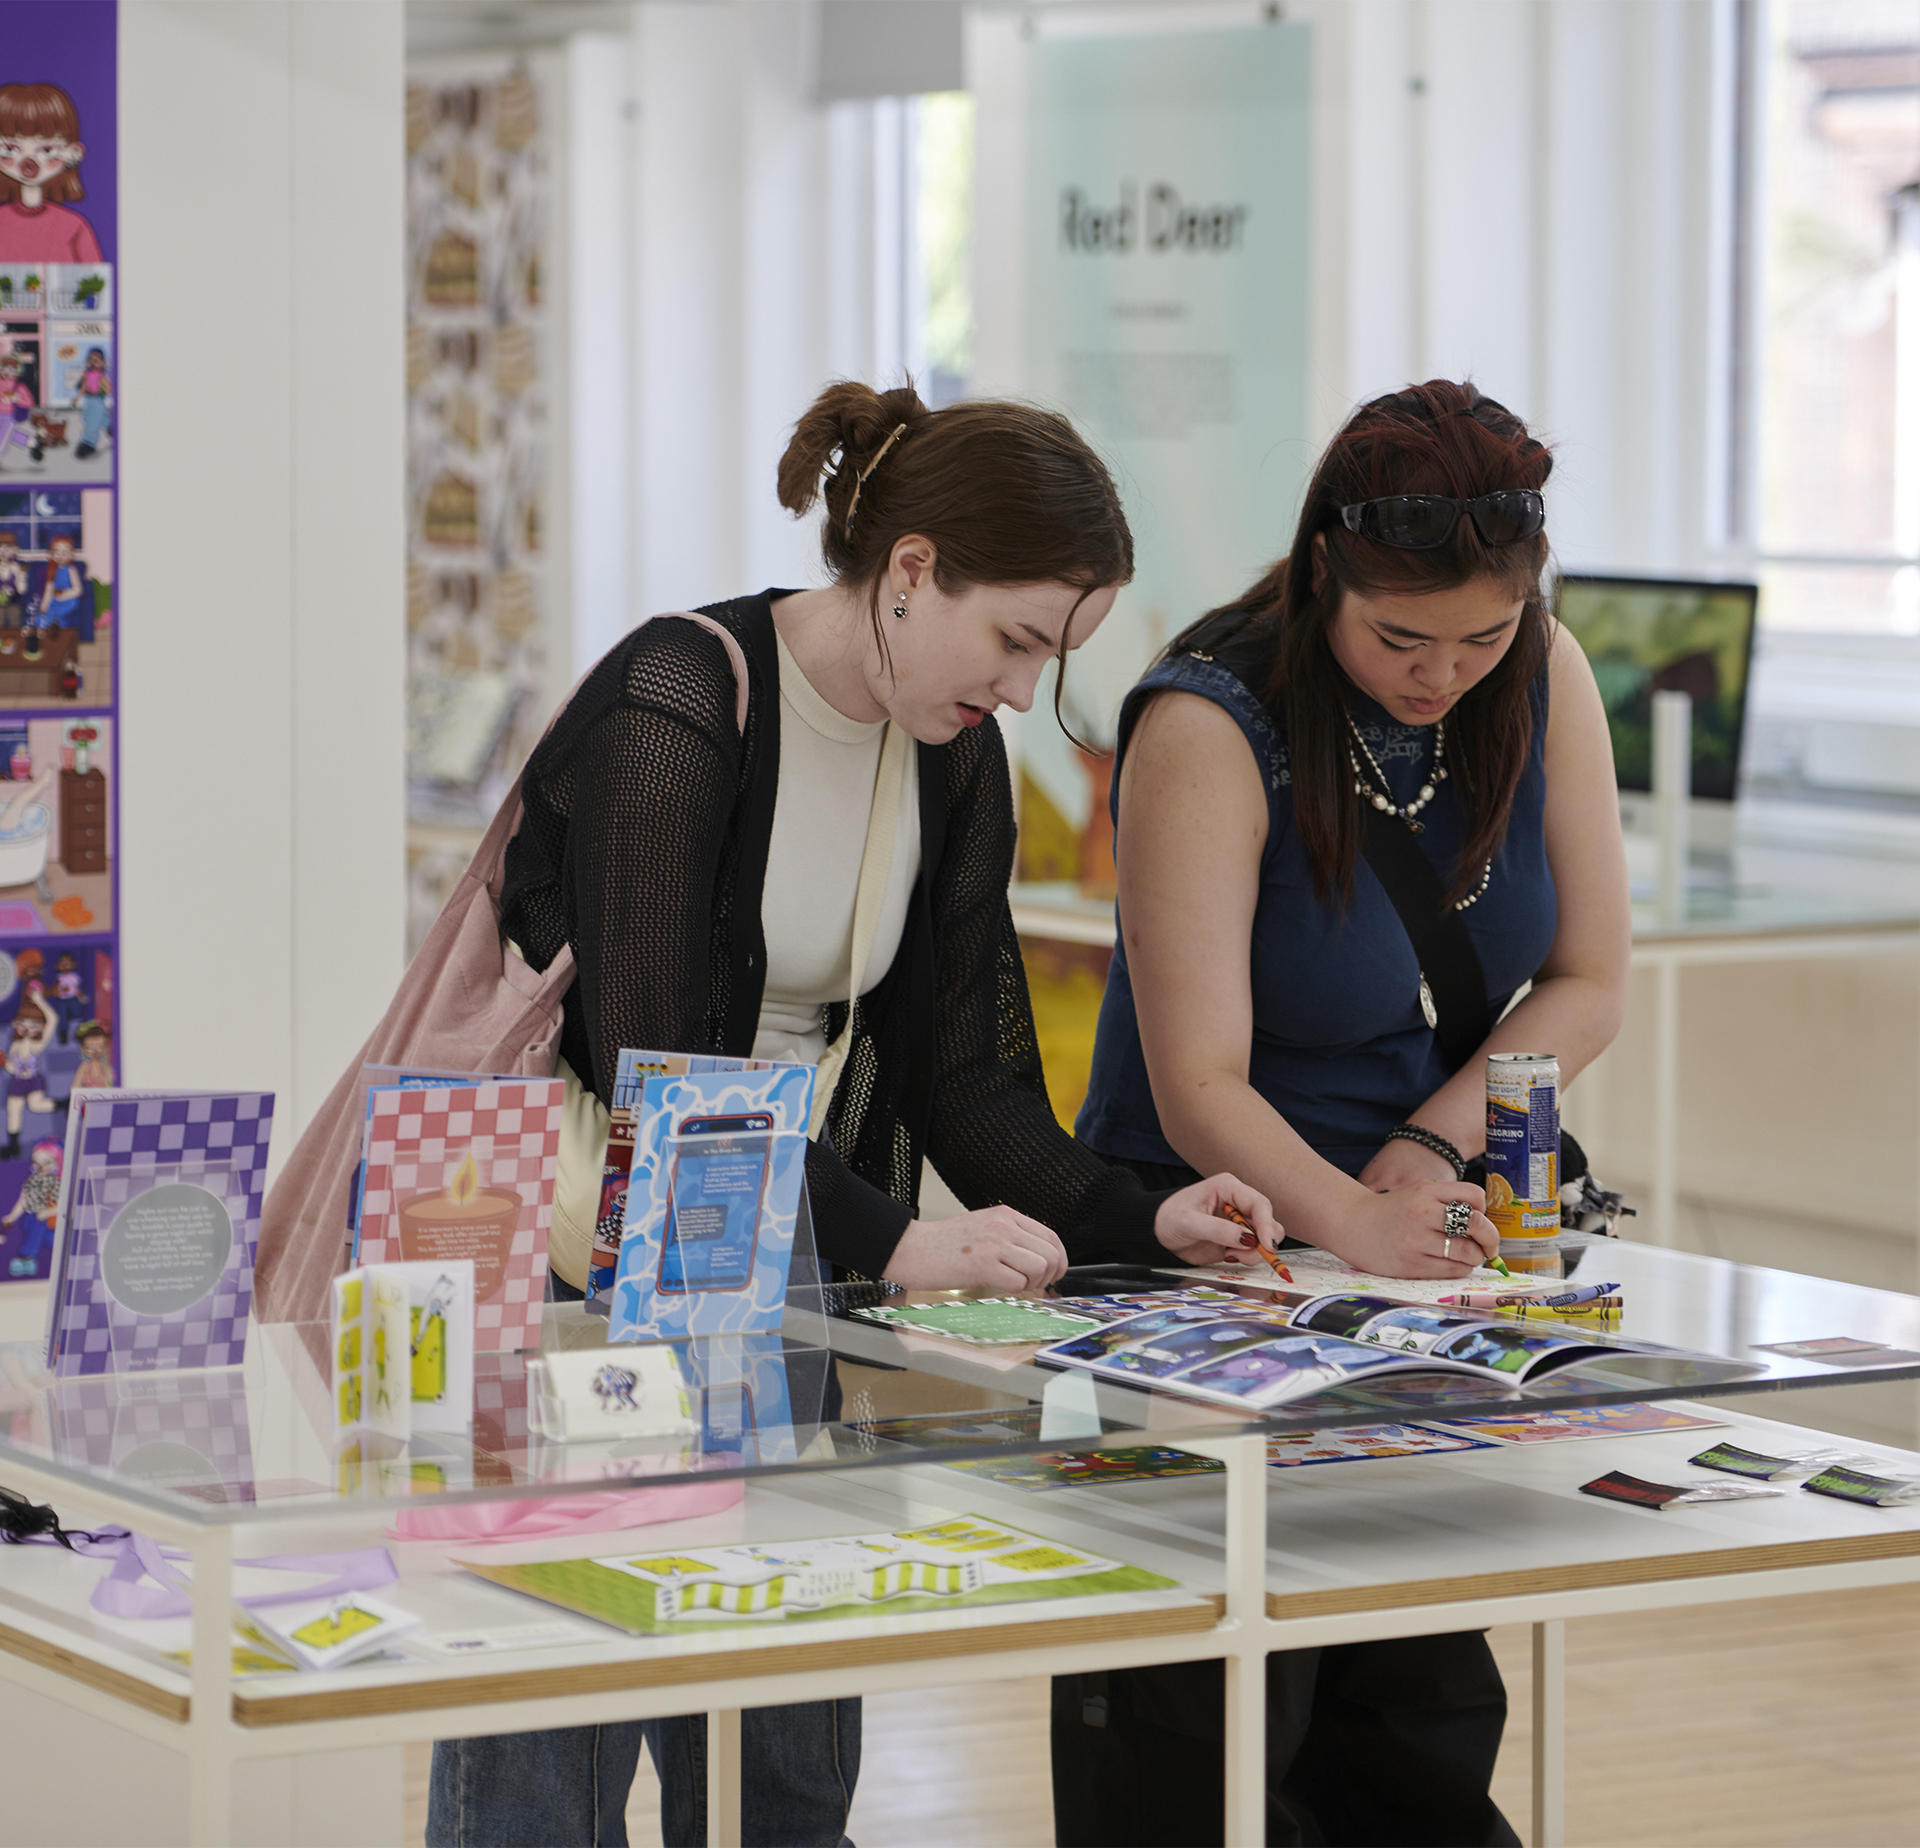 Visitors interacting with the Illustration work on display at GradFest.